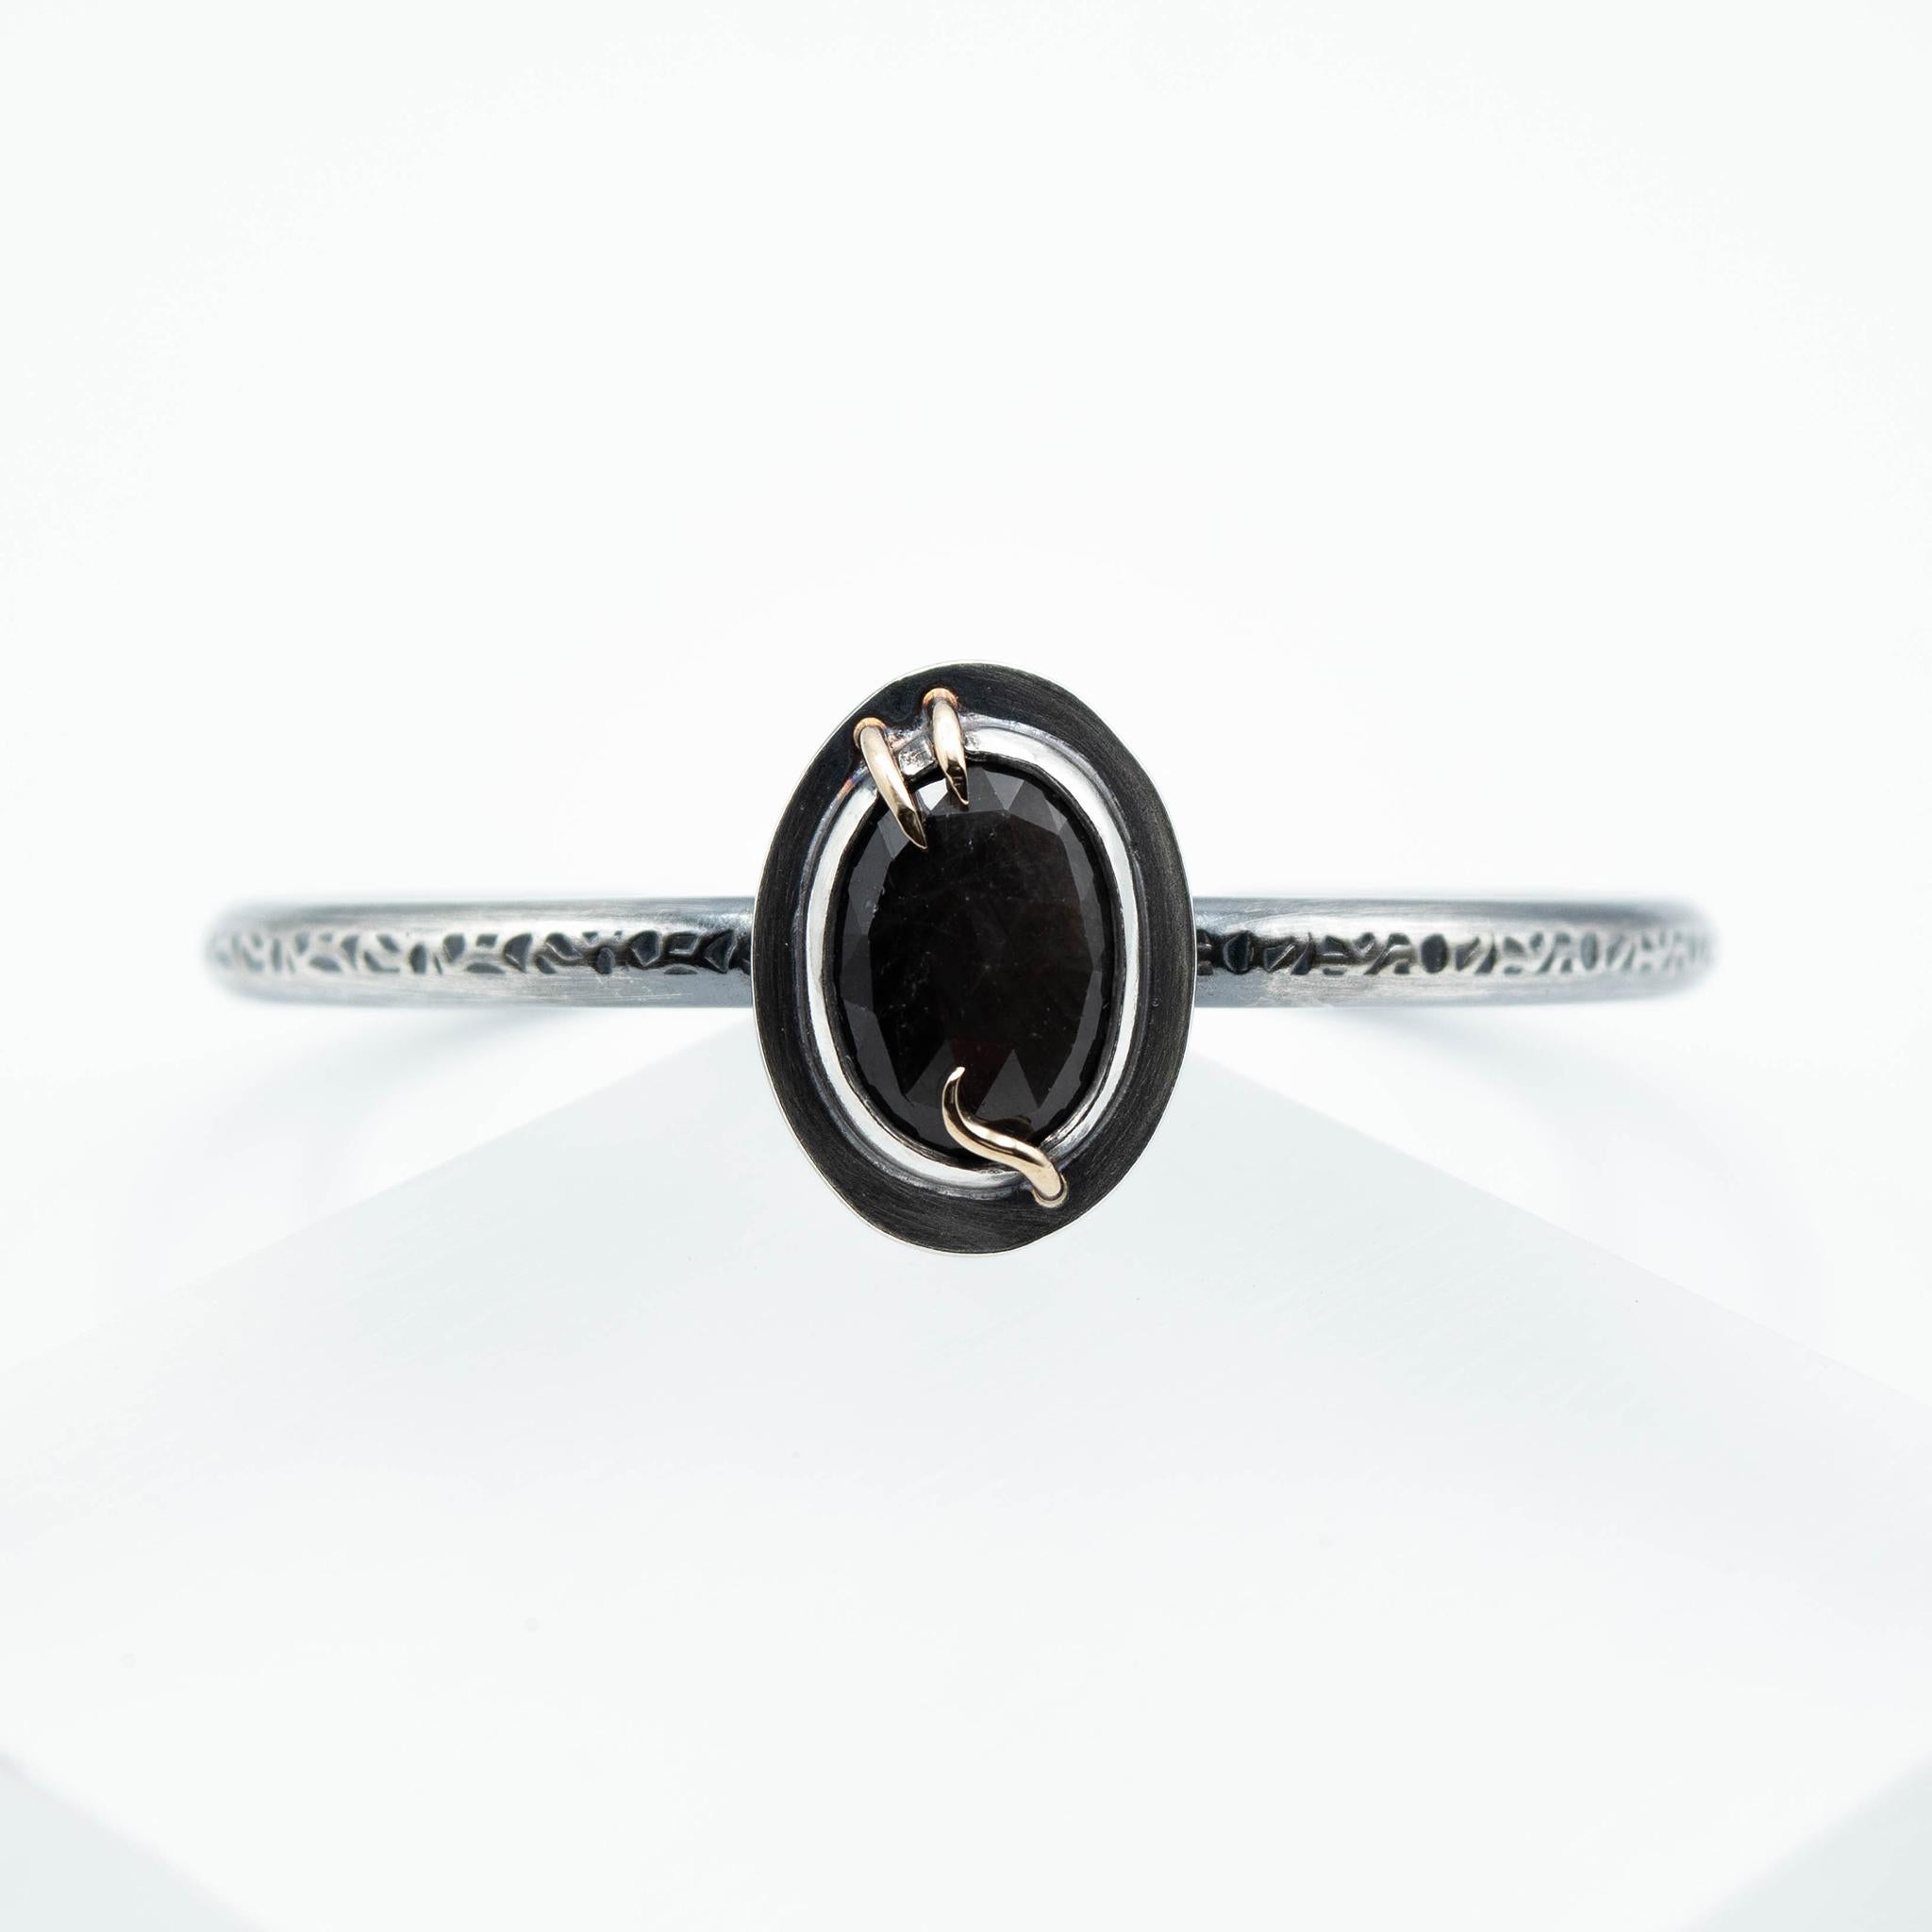 The visual elements of the Black Sapphire Abyss Cuff Bracelet was inspired by nature, elemental forms, and the inward journey. Sustainably handcrafted with recycled sterling silver and fine silver, and is adorned with a mesmerizing rosecut black